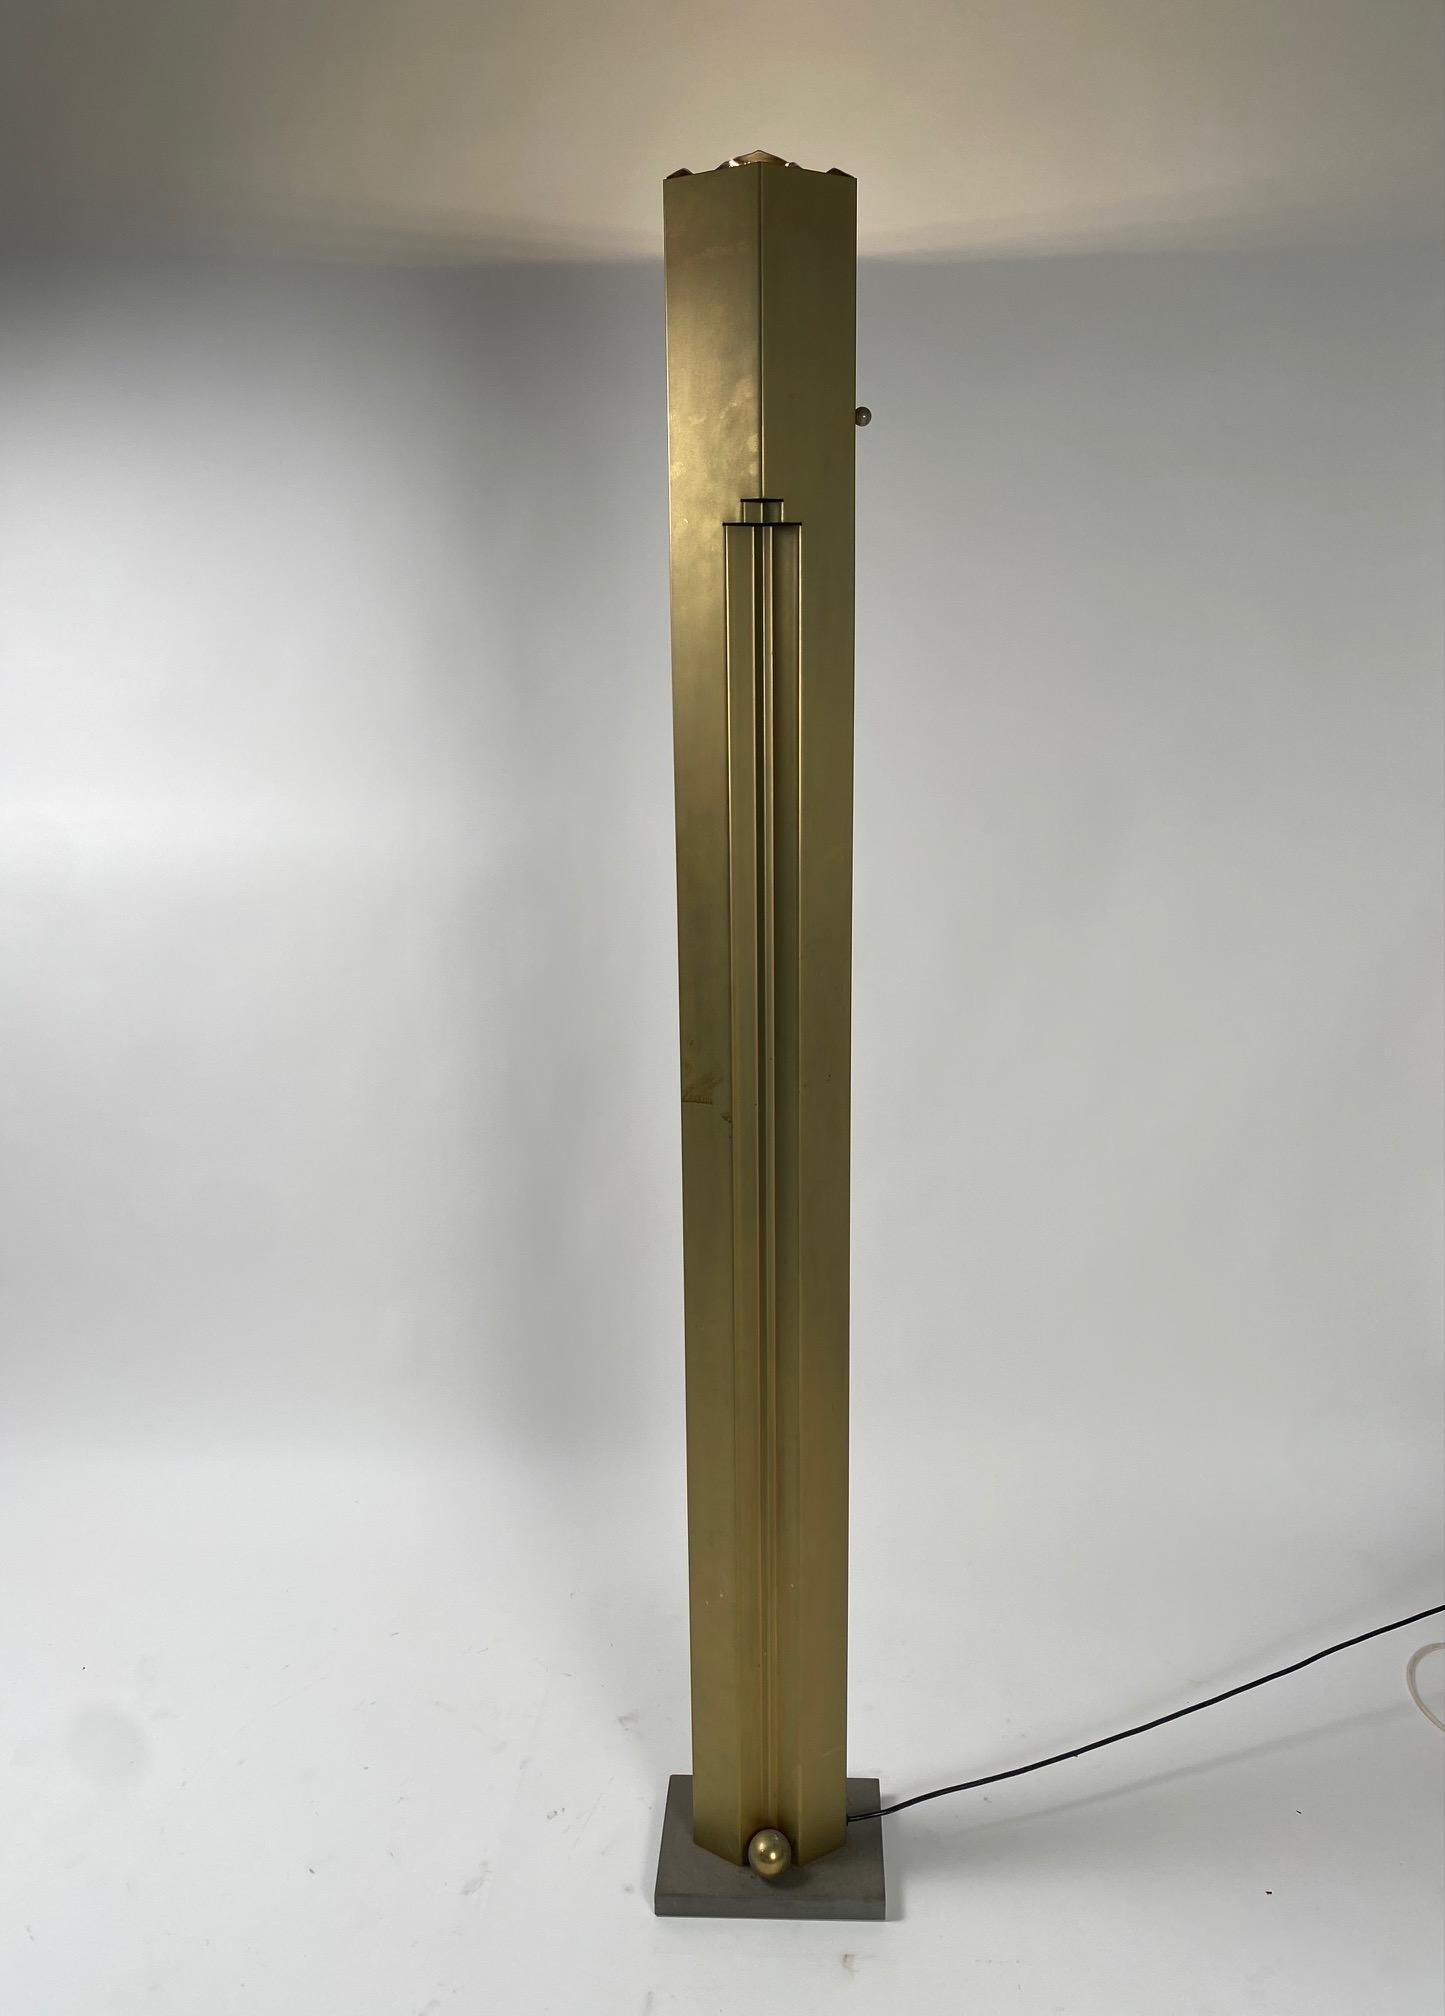 Metal Totem Floor Lamp by Kazuhide Takahama for Sirrah, Italy 1982 - Old version For Sale